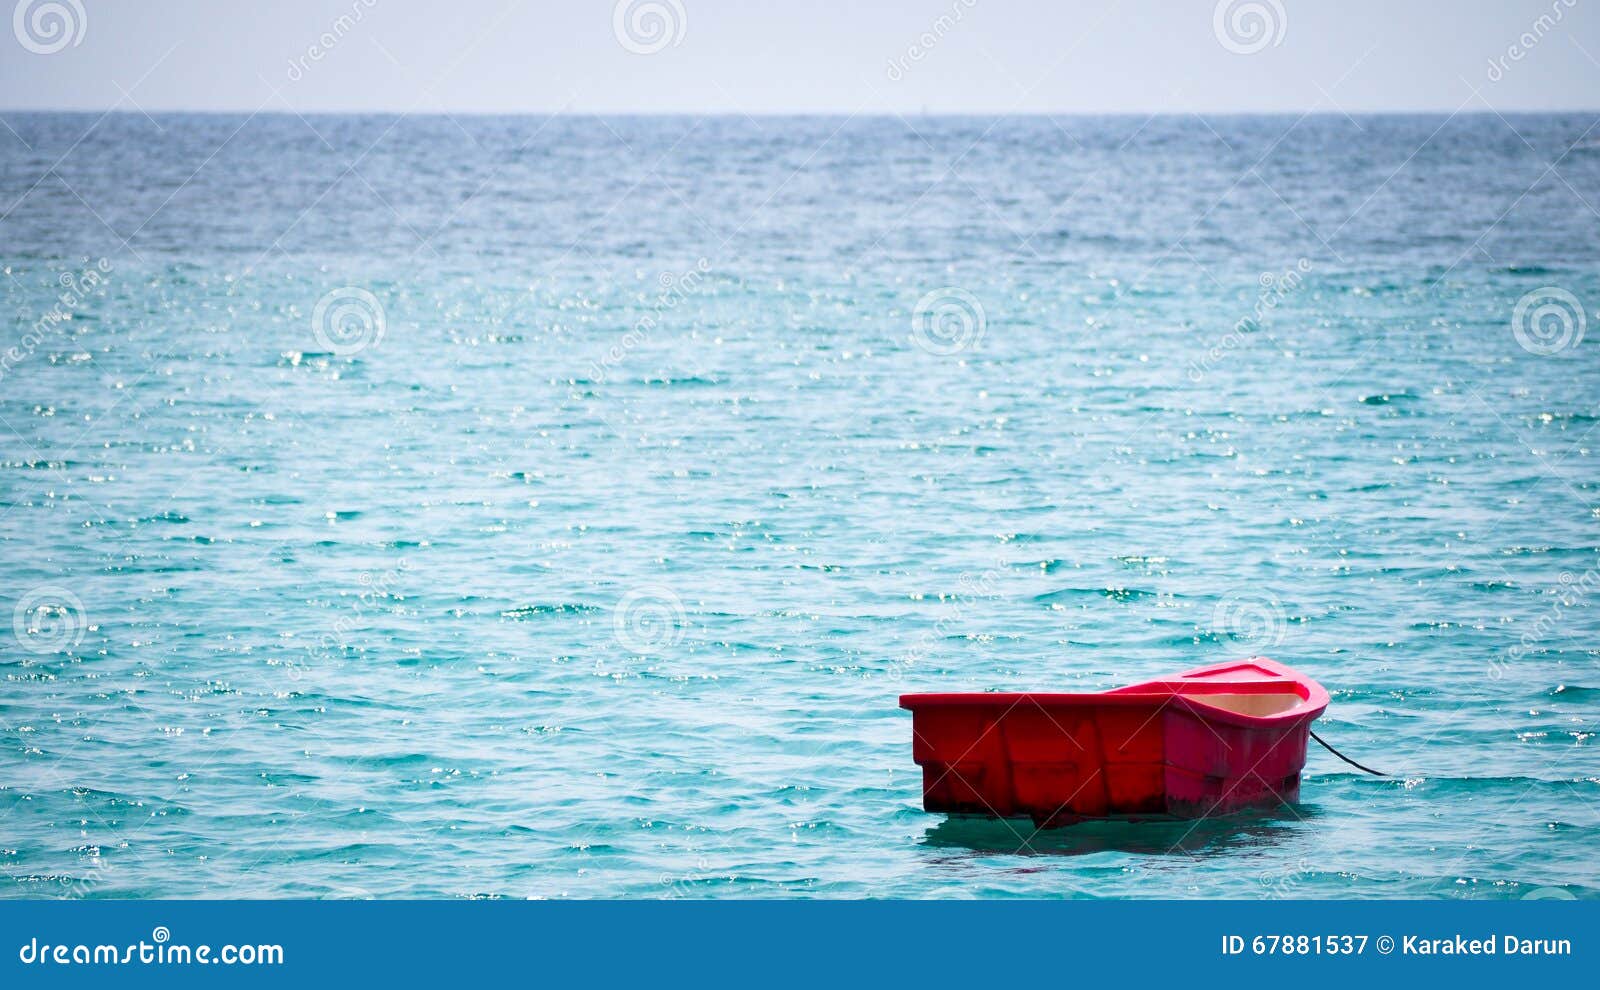 Small boat at ocean stock image. Image of vast, mountain - 67881537